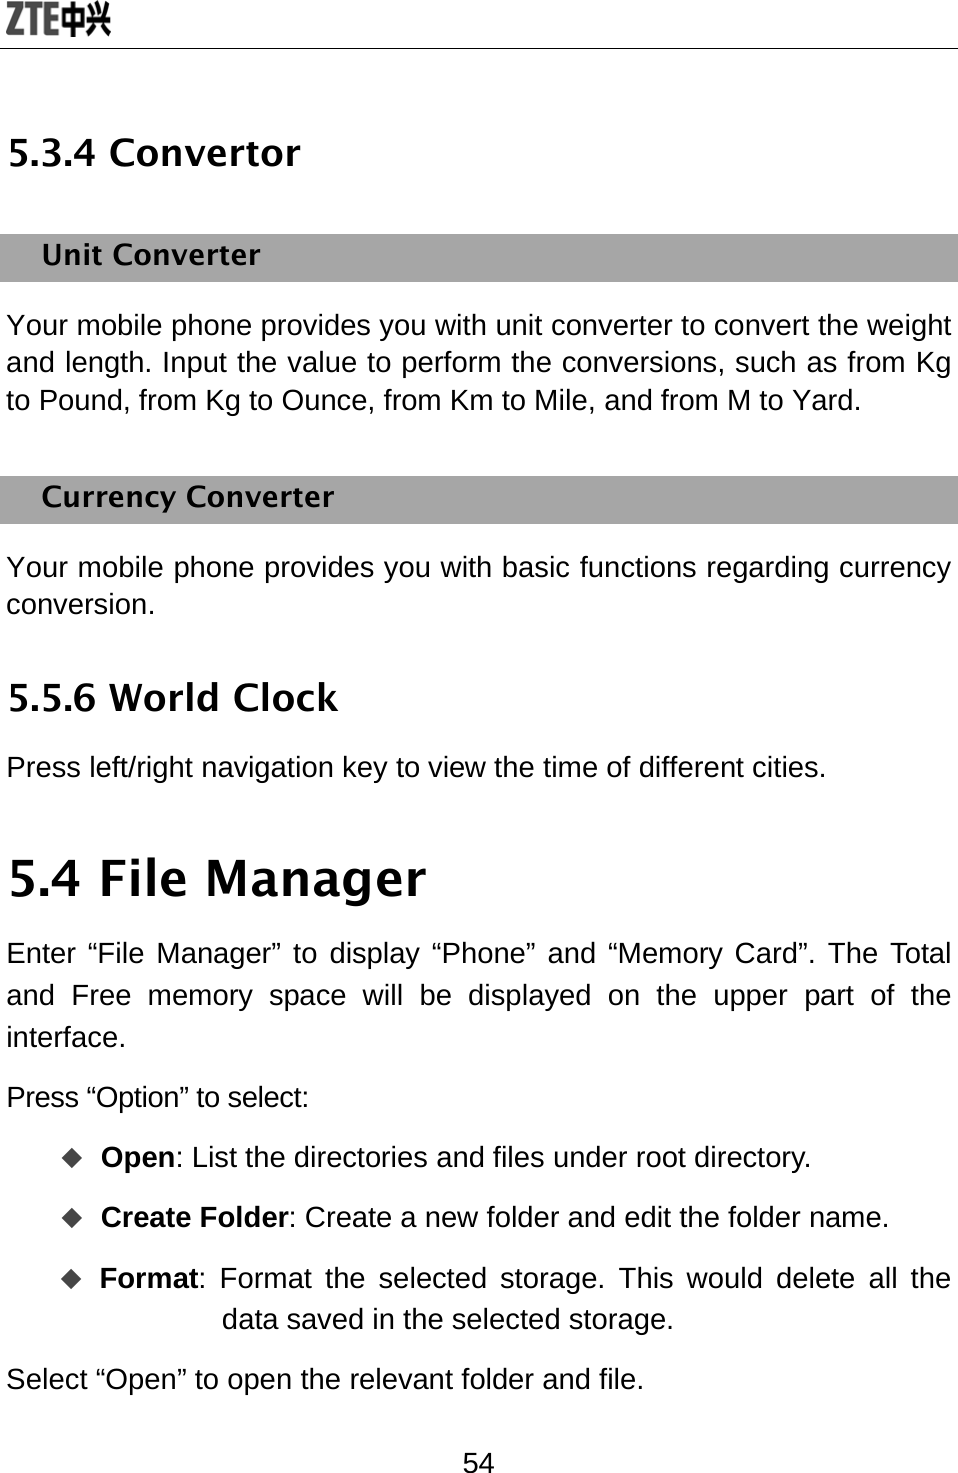  54 5.3.4 Convertor Unit Converter Your mobile phone provides you with unit converter to convert the weight and length. Input the value to perform the conversions, such as from Kg to Pound, from Kg to Ounce, from Km to Mile, and from M to Yard. Currency Converter Your mobile phone provides you with basic functions regarding currency conversion. 5.5.6 World Clock Press left/right navigation key to view the time of different cities. 5.4 File Manager Enter “File Manager” to display “Phone” and “Memory Card”. The Total and Free memory space will be displayed on the upper part of the interface. Press “Option” to select:  Open: List the directories and files under root directory.  Create Folder: Create a new folder and edit the folder name.  Format: Format the selected storage. This would delete all the data saved in the selected storage. Select “Open” to open the relevant folder and file. 